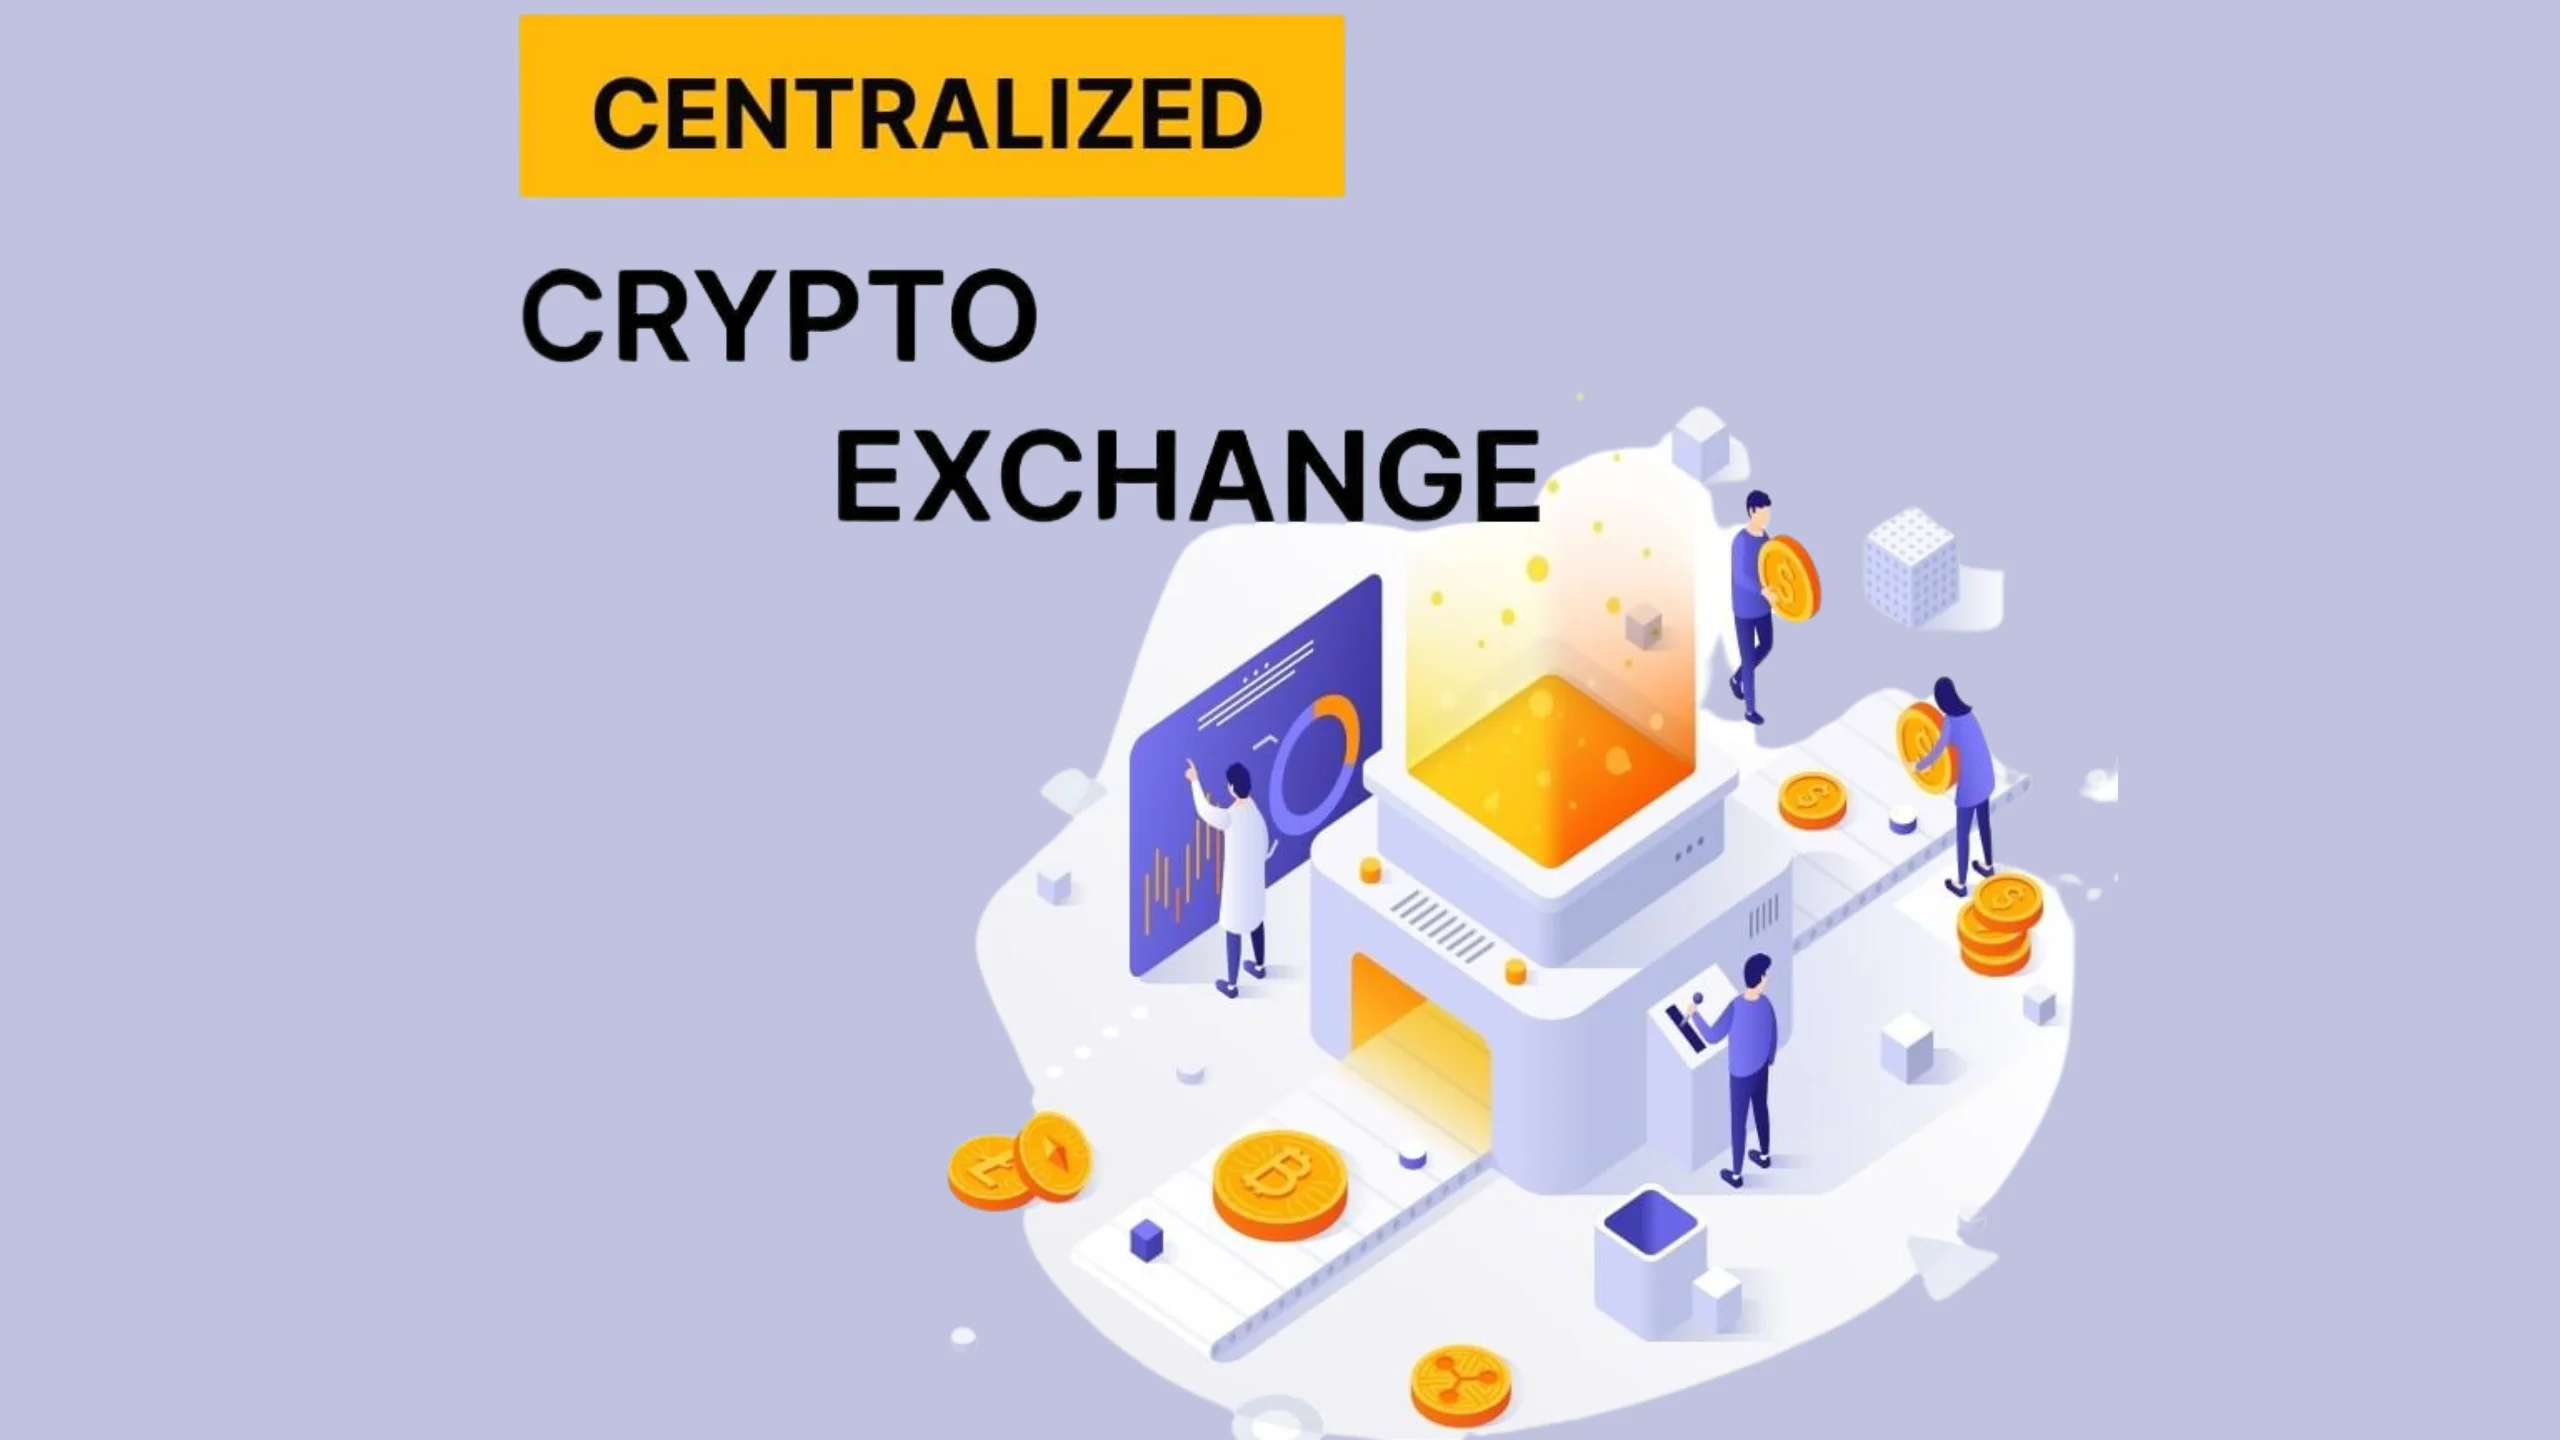 Crucial elements of centralized crypto exchange UX/UI design, focusing on user navigation and security features.